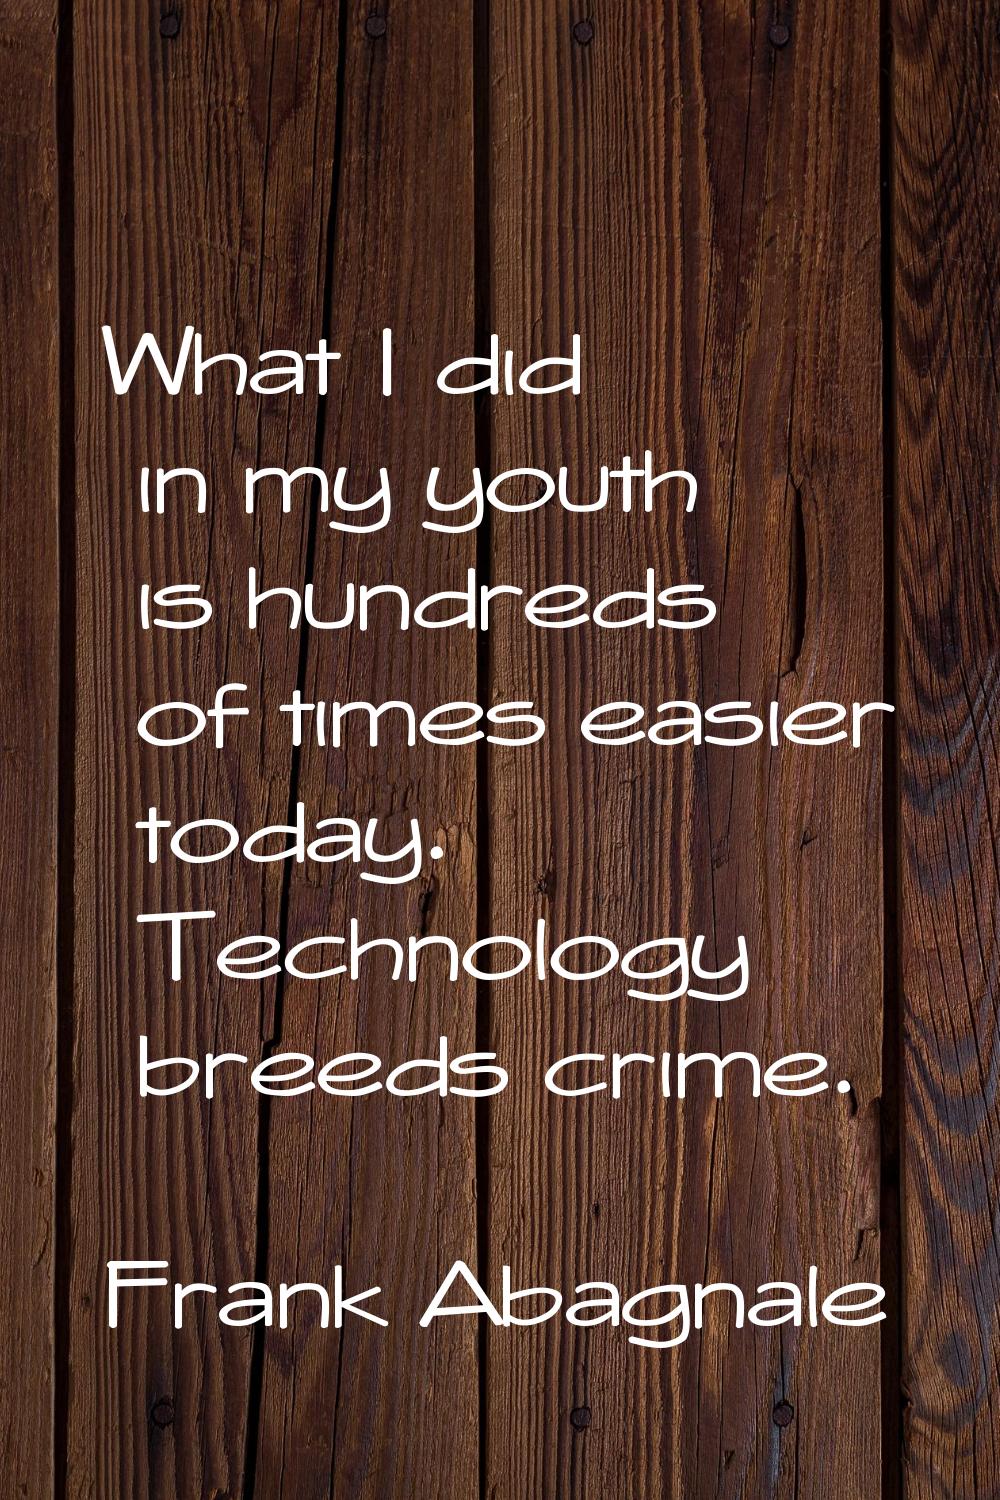 What I did in my youth is hundreds of times easier today. Technology breeds crime.